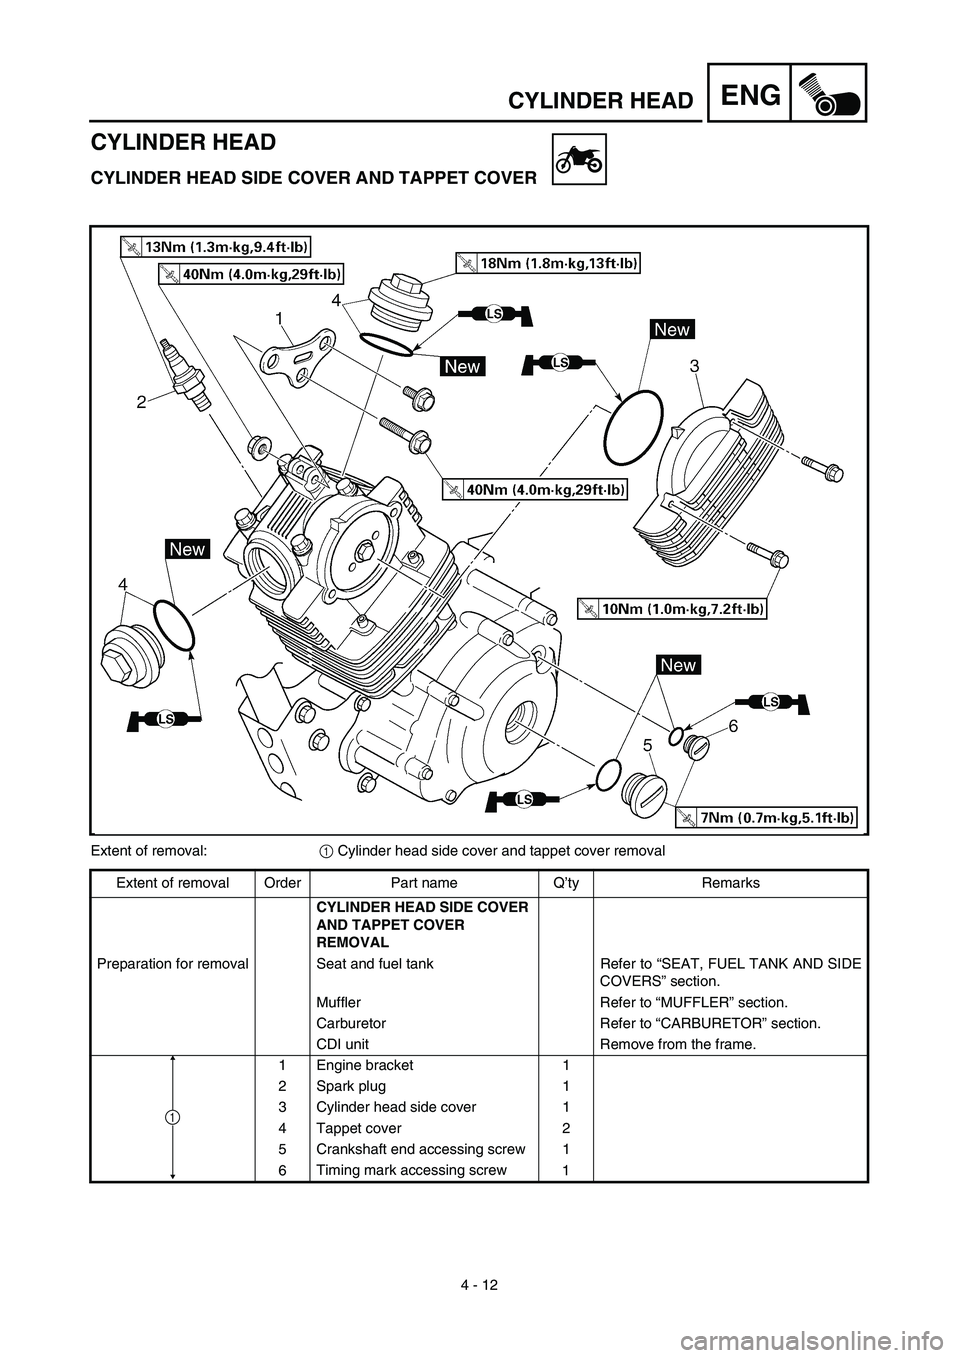 YAMAHA TTR125 2003  Notices Demploi (in French) 4 - 12
ENGCYLINDER HEAD
CYLINDER HEAD
CYLINDER HEAD SIDE COVER AND TAPPET COVER
Extent of removal:1 Cylinder head side cover and tappet cover removal
Extent of removal Order Part name Q’ty Remarks
C